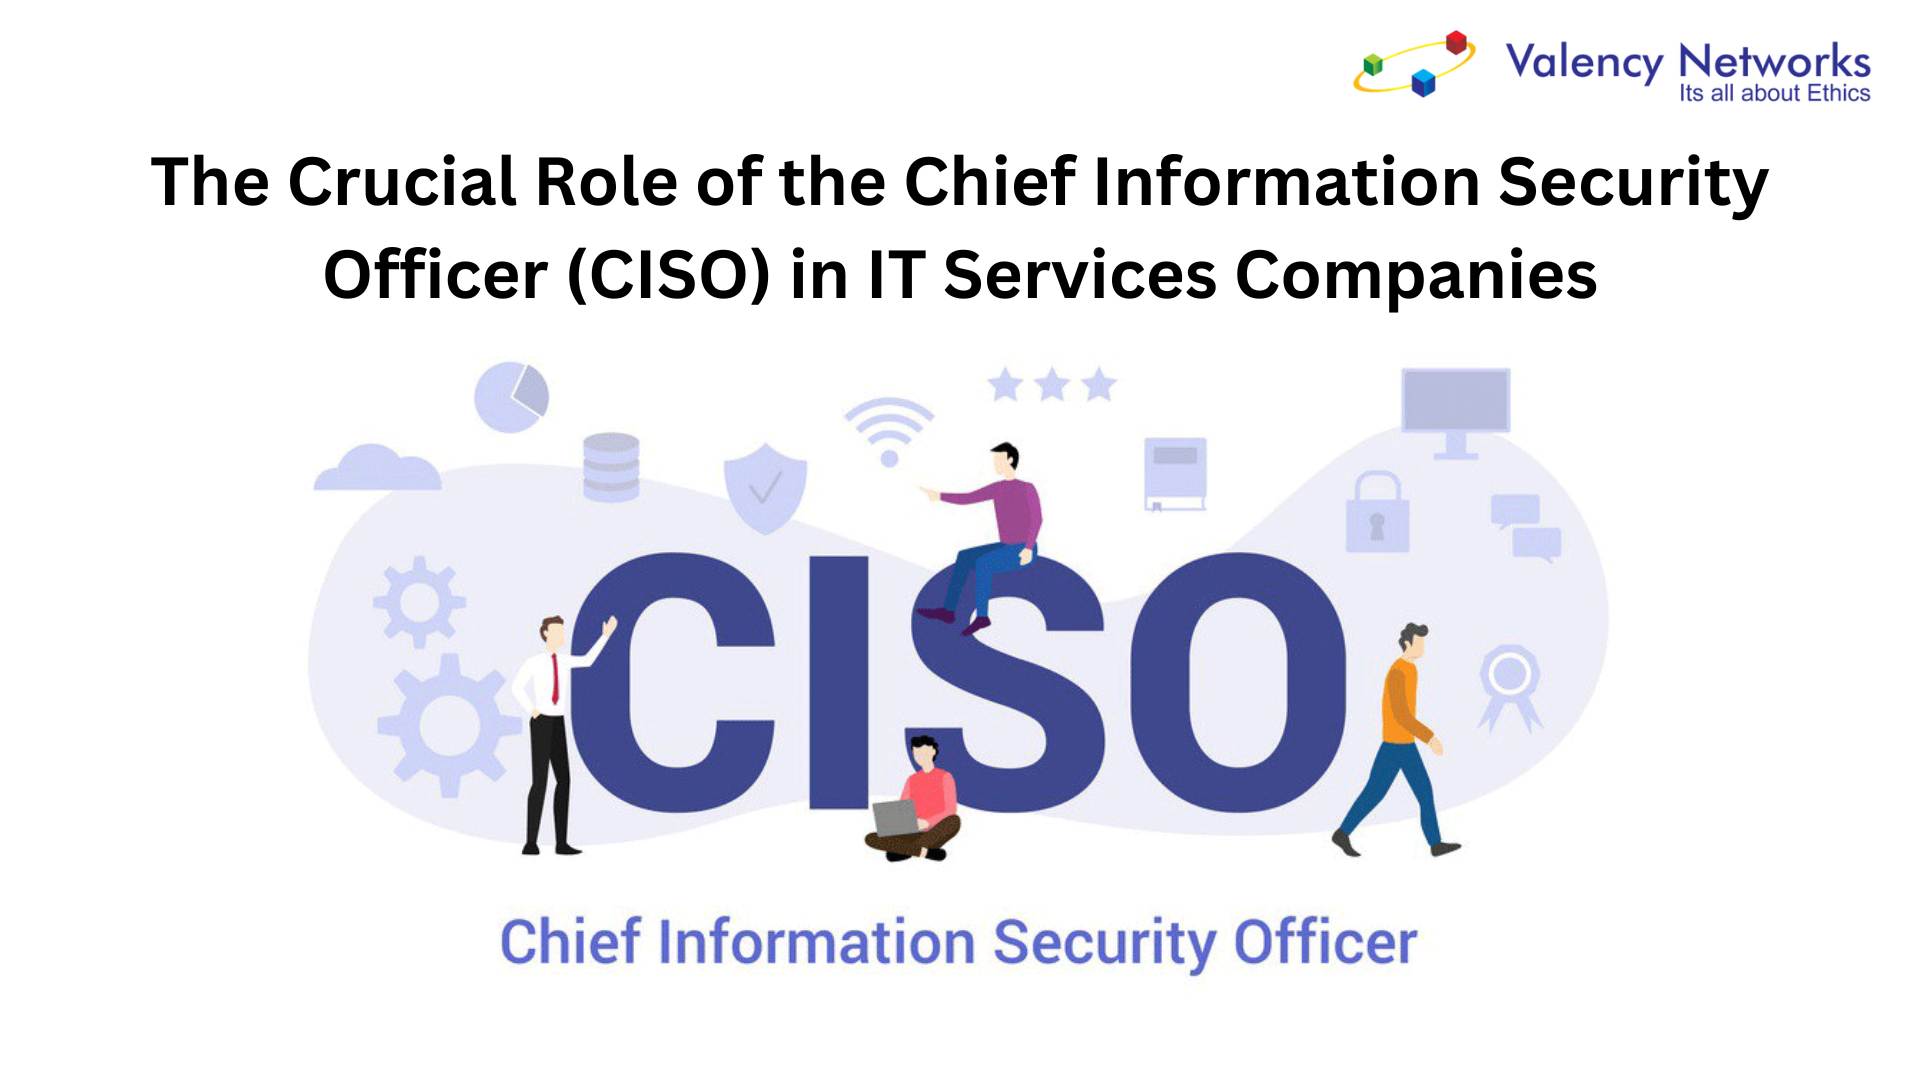 The Crucial Role of the Chief Information Security Officer (CISO) in IT Services Companies